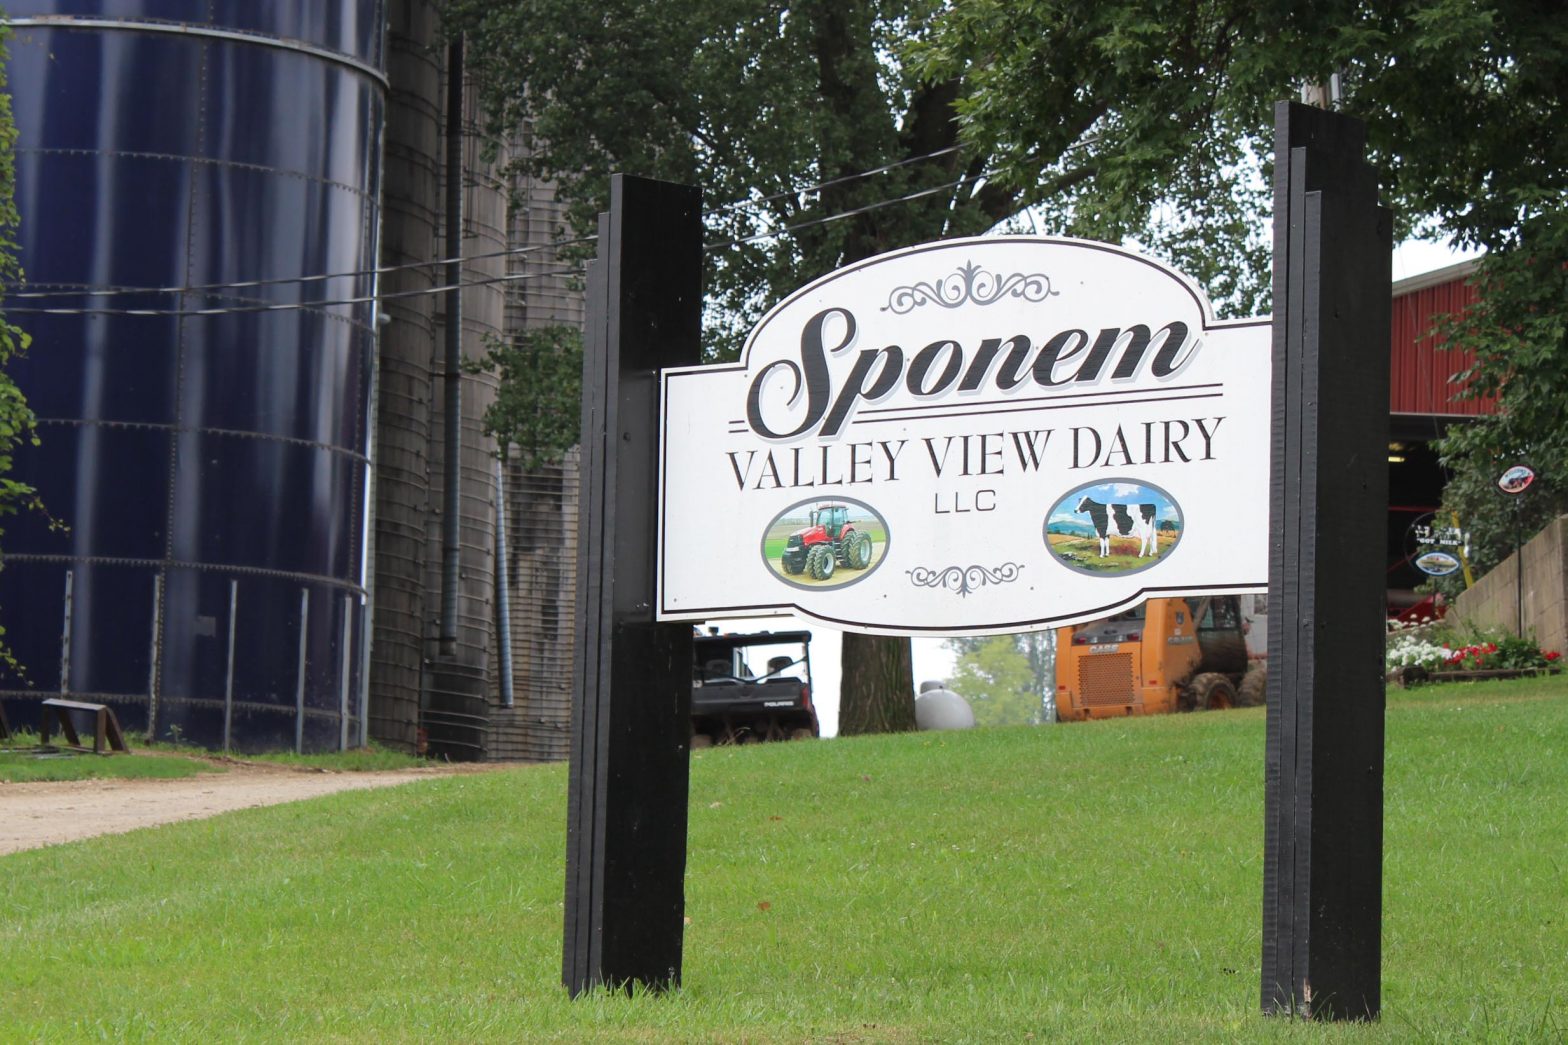 Sponem Valley View Dairy, LLC in Mount Horeb, Wisconsin is owned by Steve and Karen Sponem along with their two sons, Dustin and Travis, daughter, Ashley, and her husband, Scott.  The farm recently expanded to milk 300 cows with a total of 600 animals the farm.